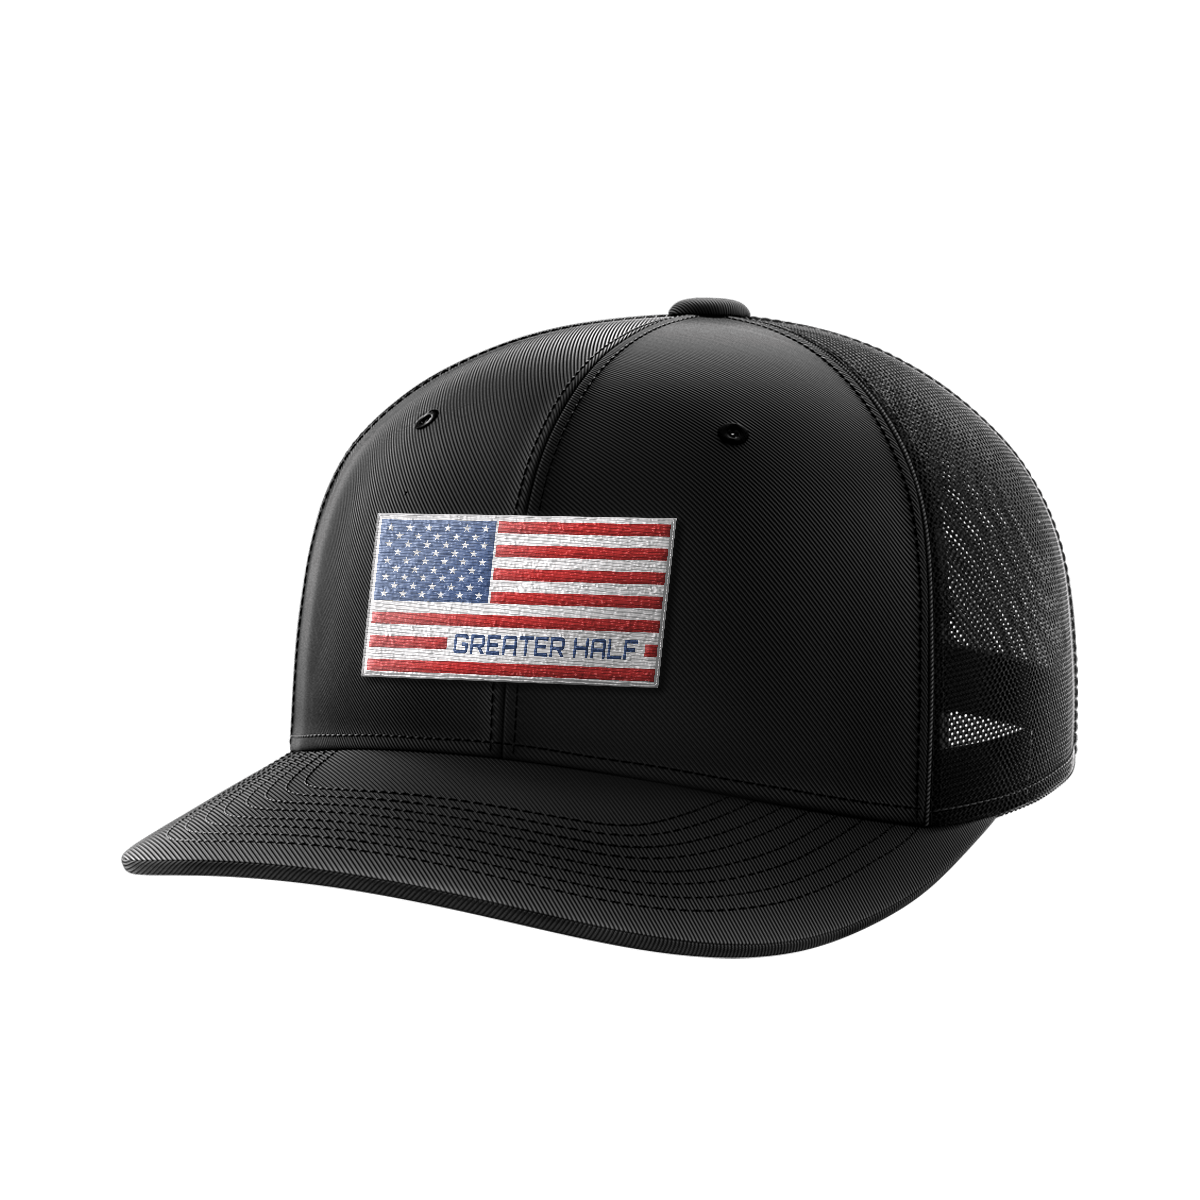 Thumbnail for USA Flag Woven Patch Hat - Greater Half